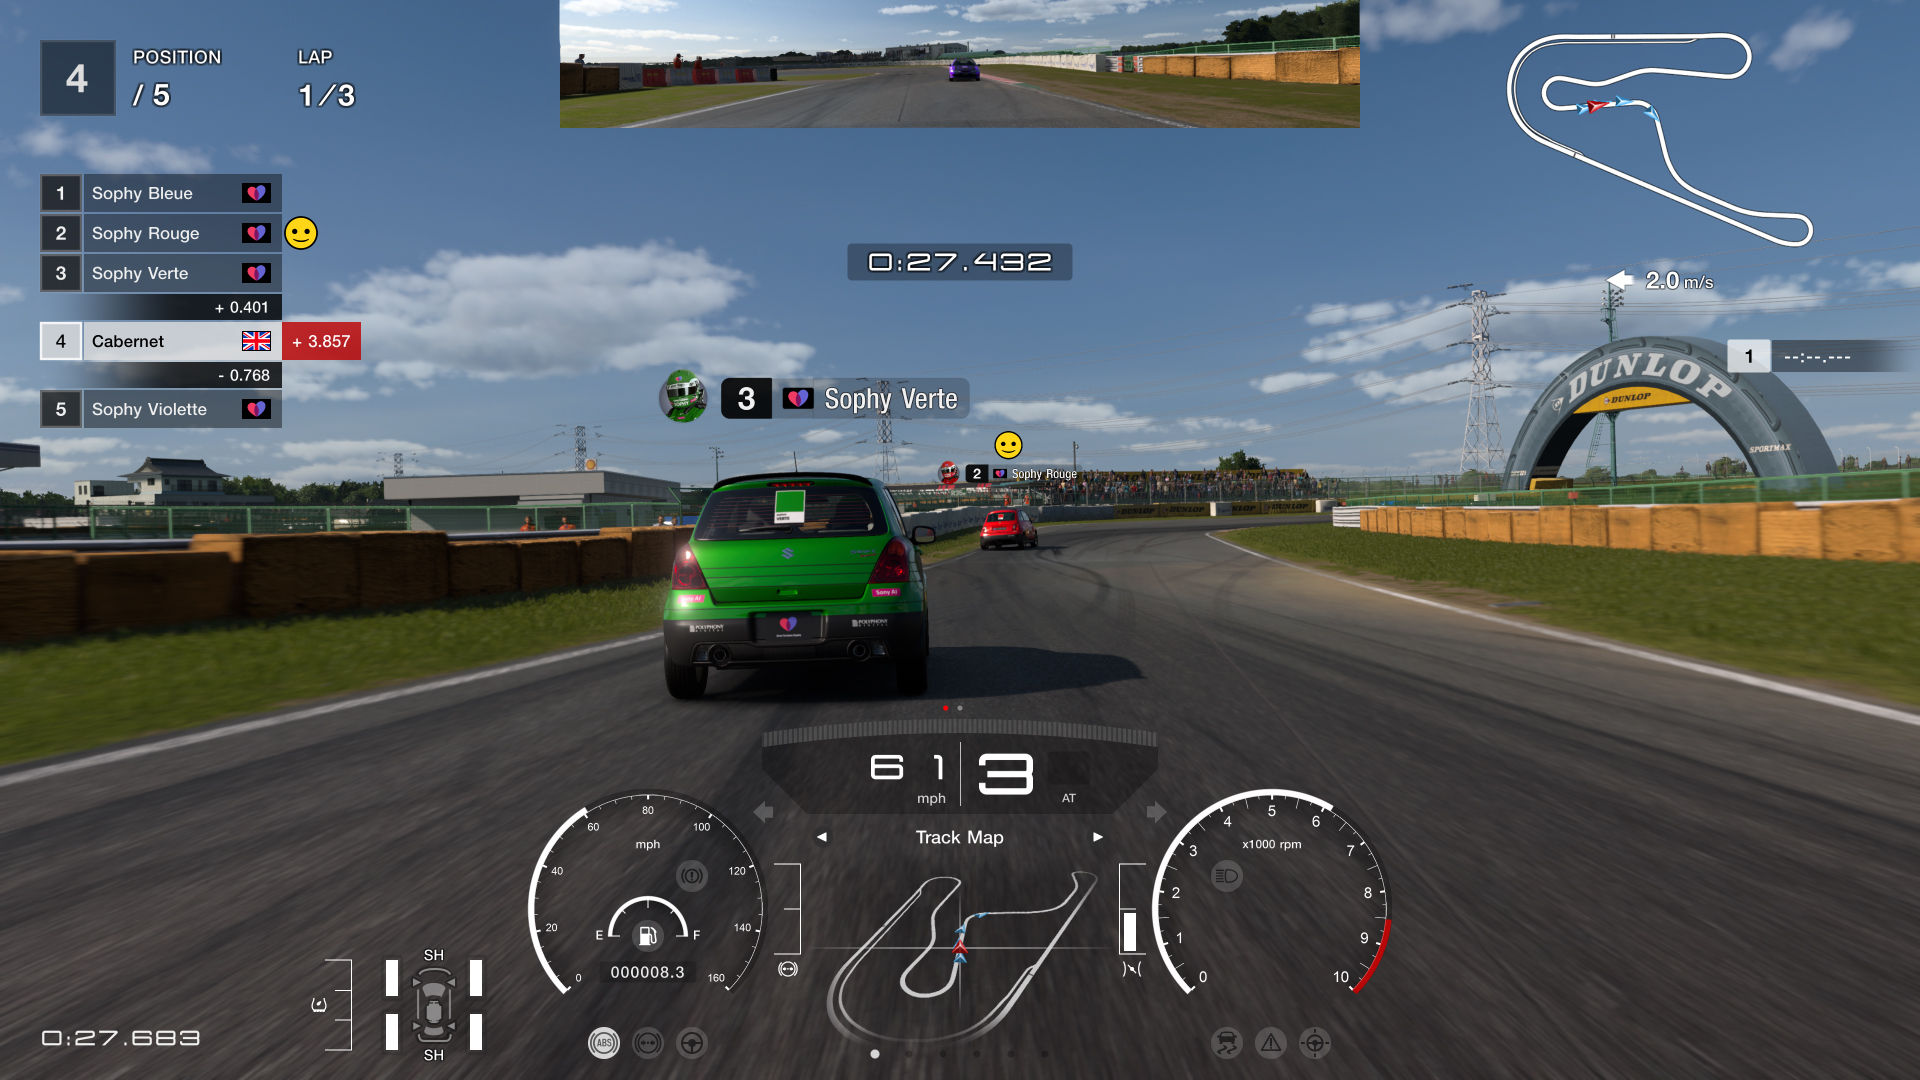 Screenshots of various aspects of the GT Sophy racing experience